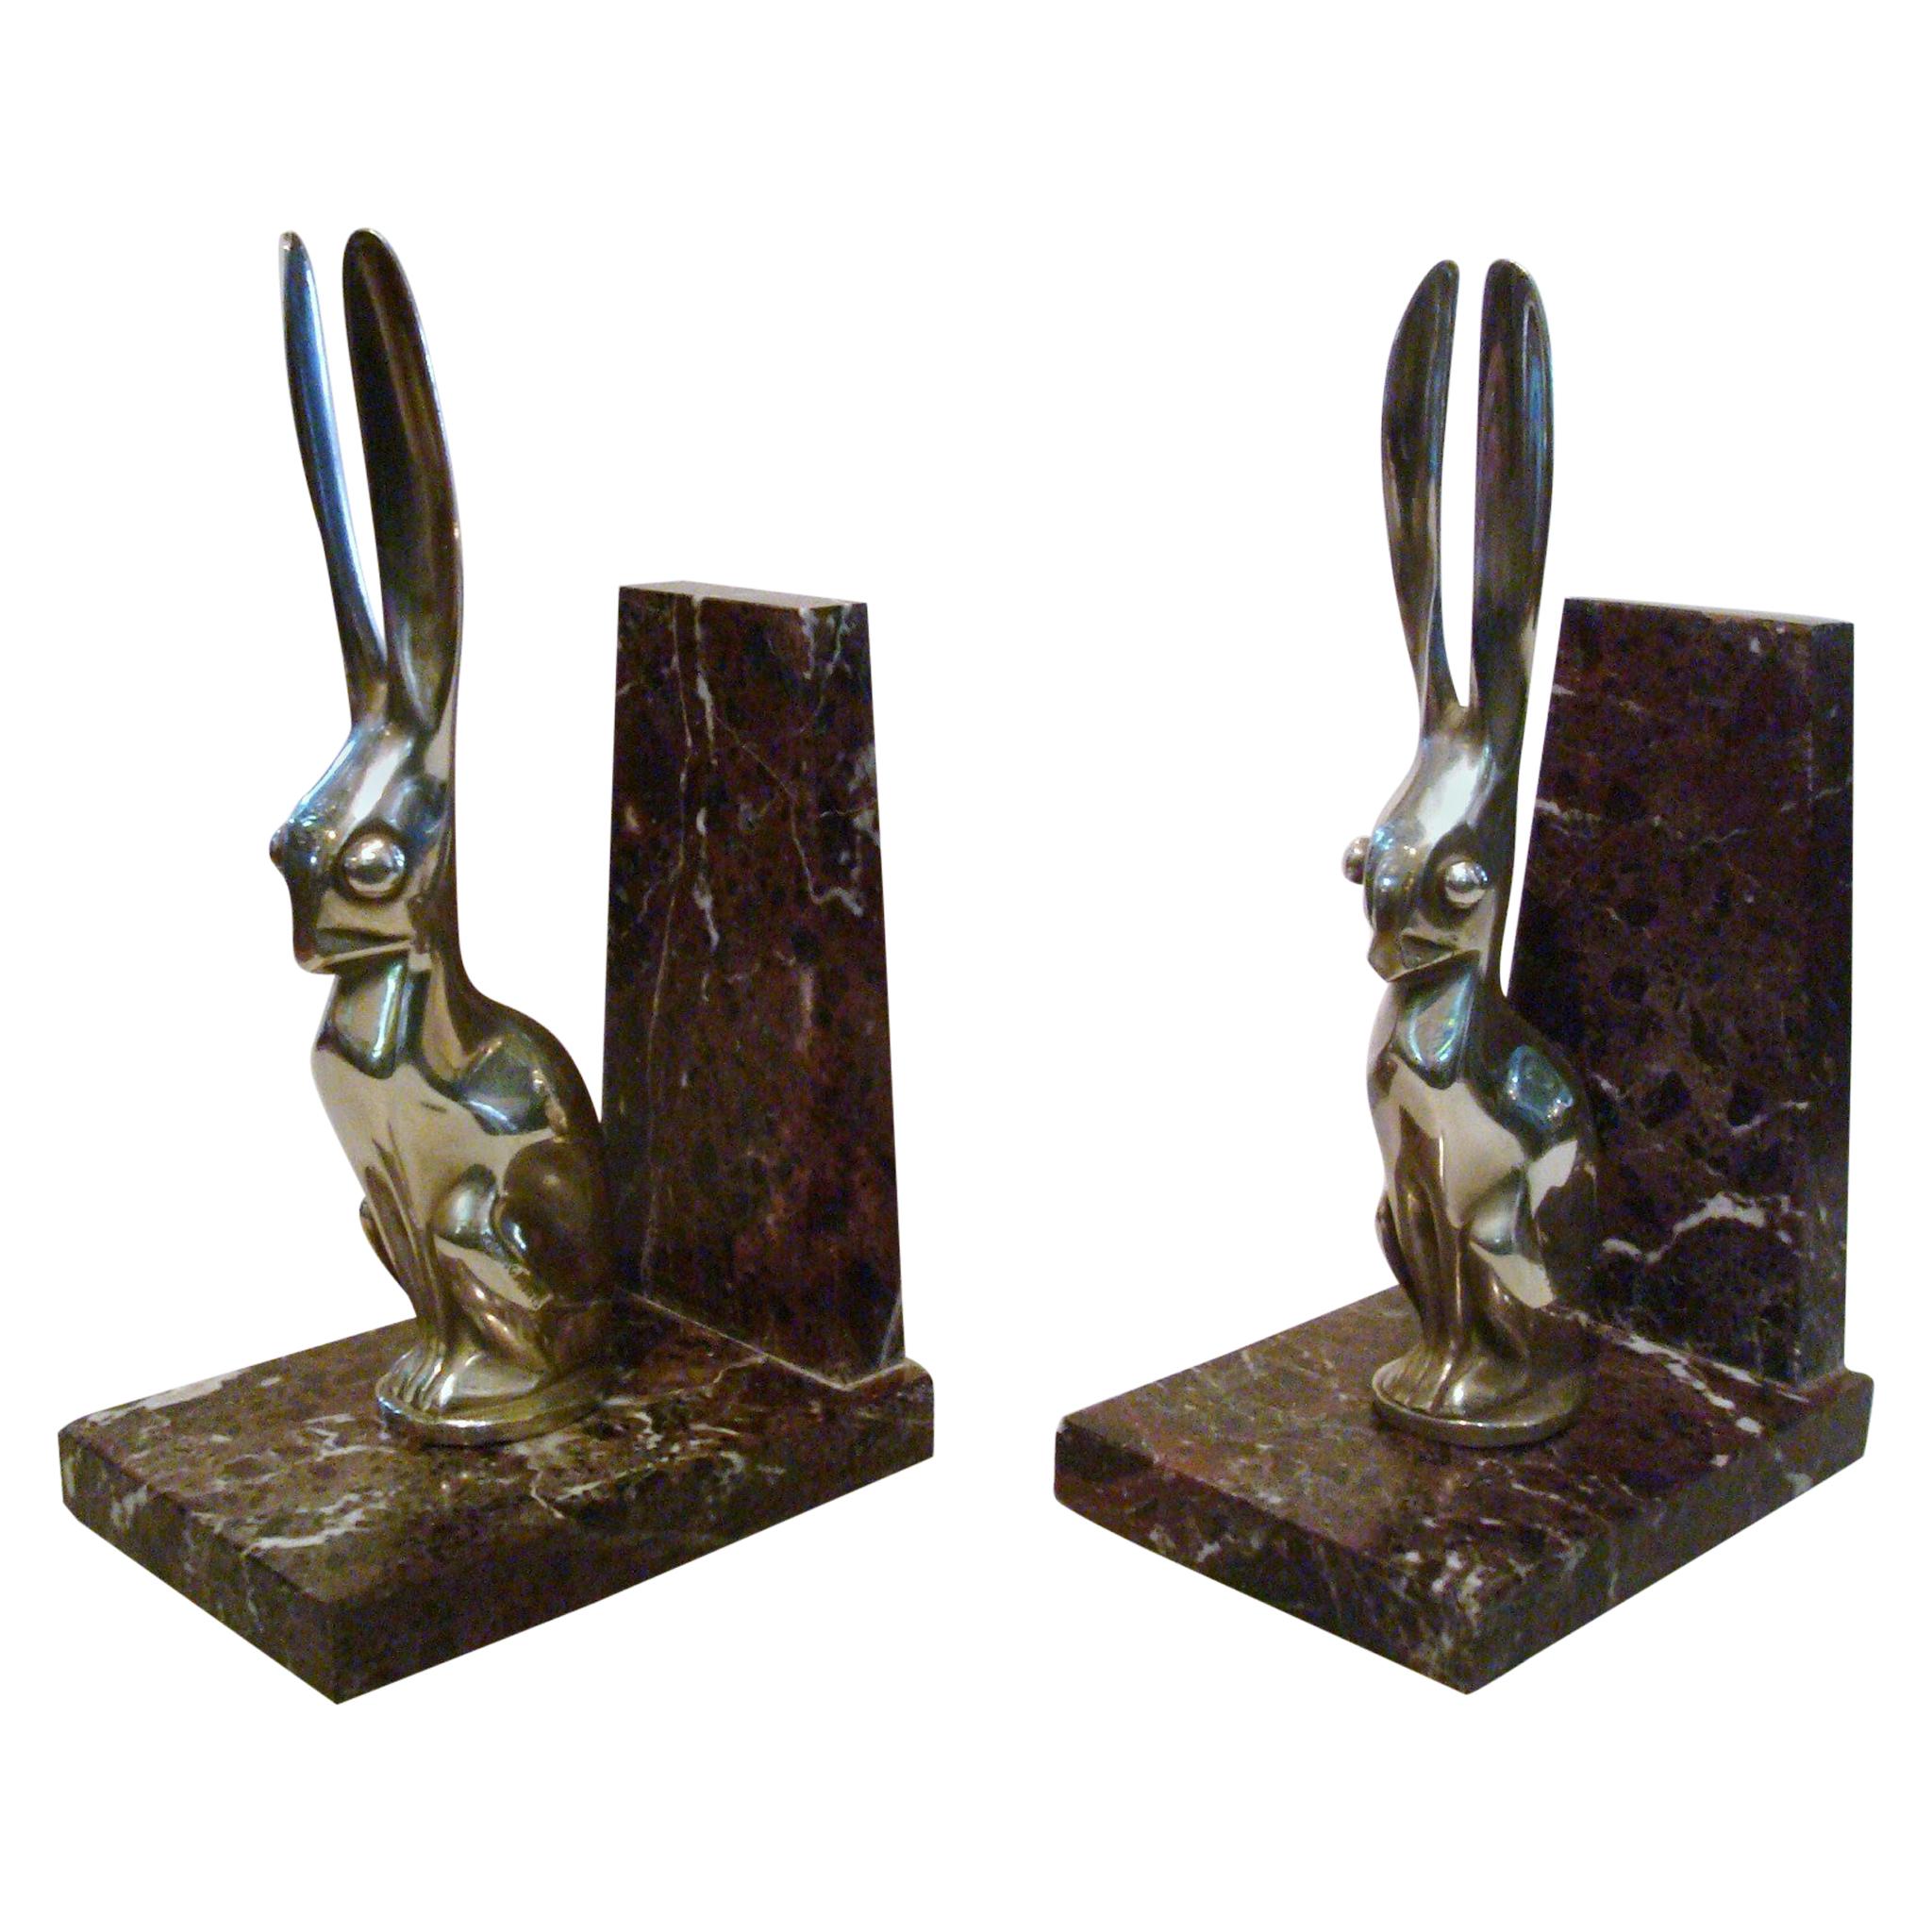 Art Deco Hare or Rabbit bookends designed by Becquerel